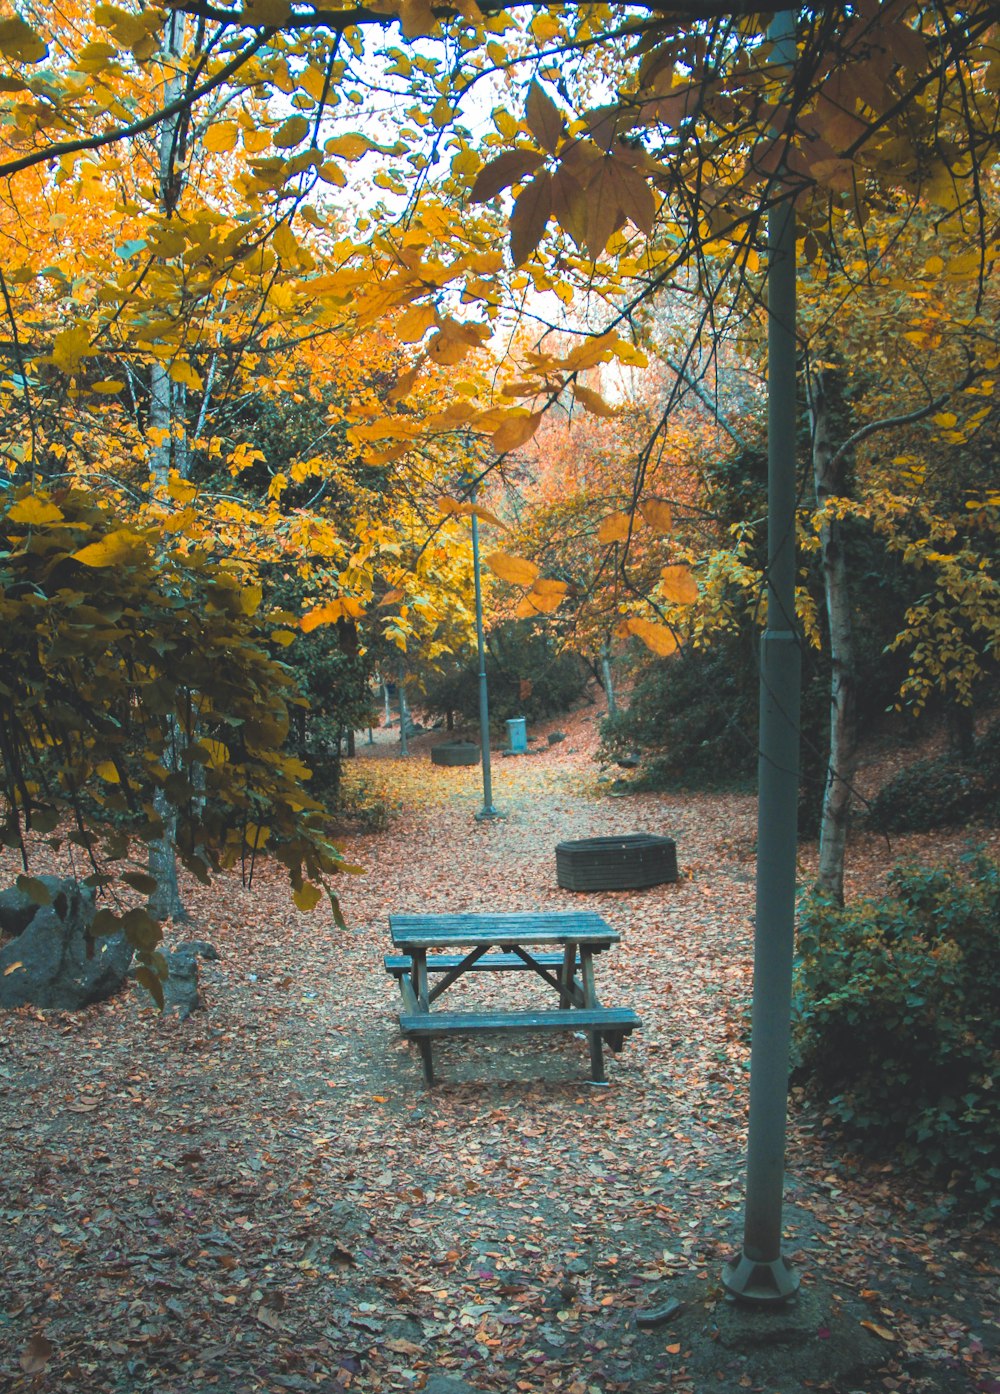 a picnic table in a park